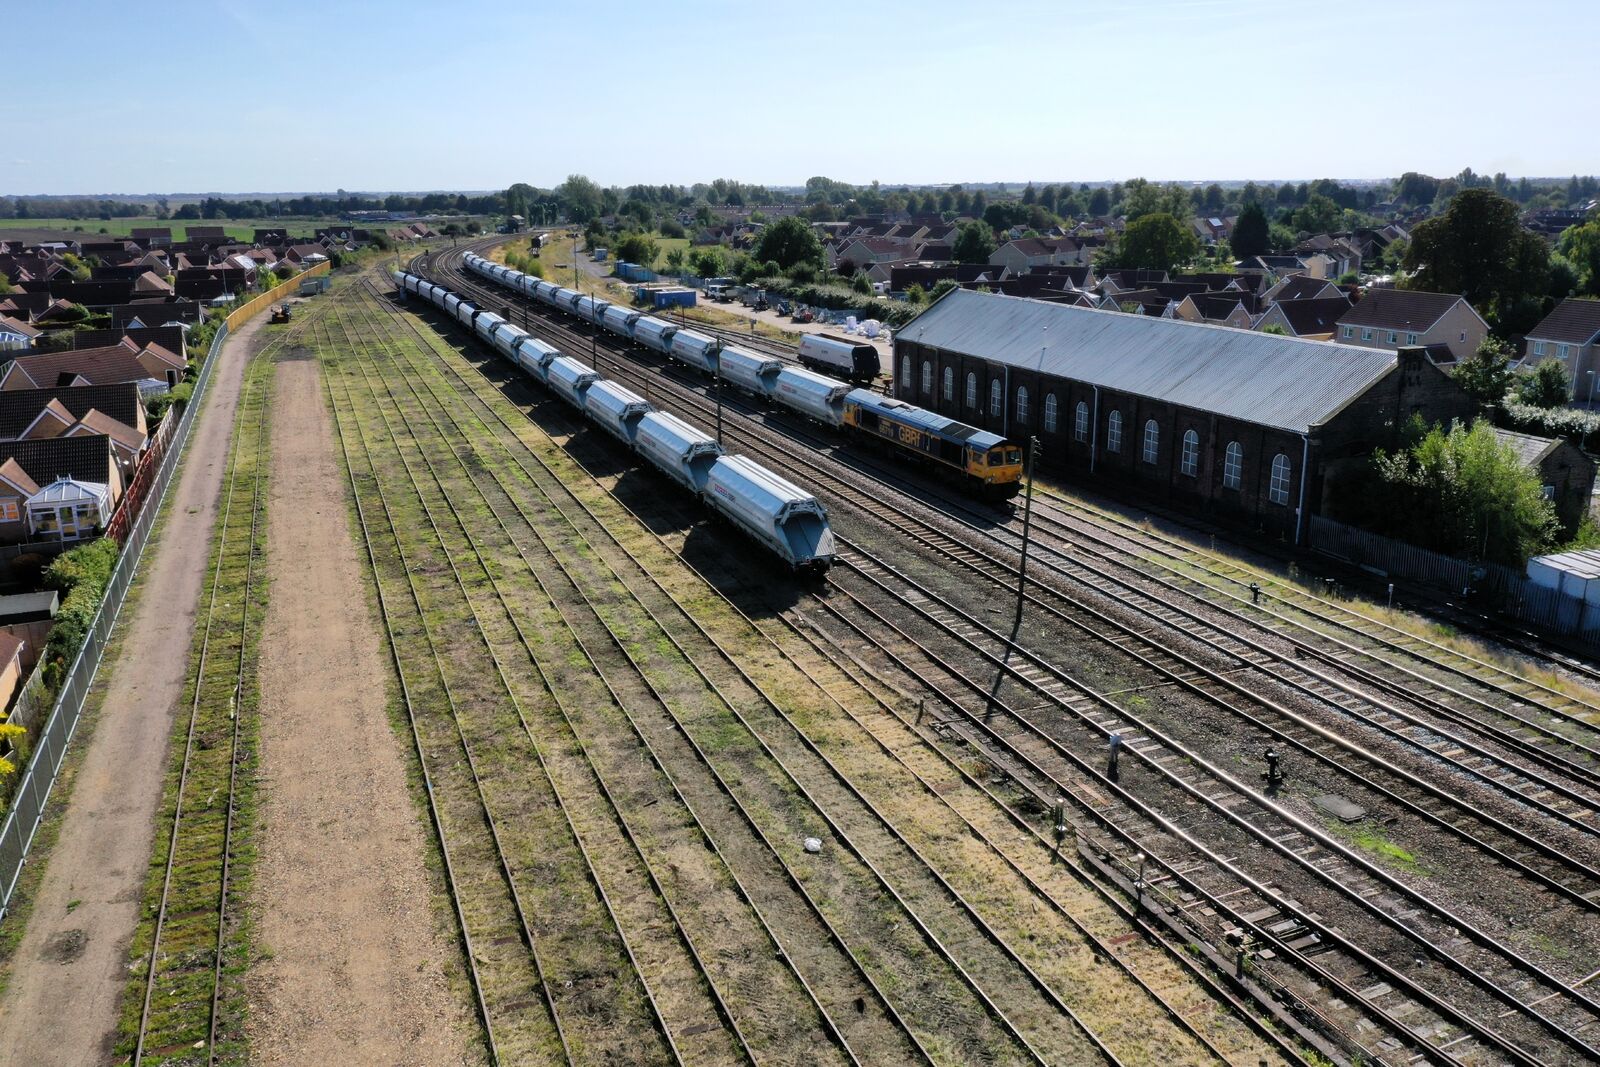 GB Railfreight announce extra investment in Cambridgeshire properties and facilities despite economic uncertainty